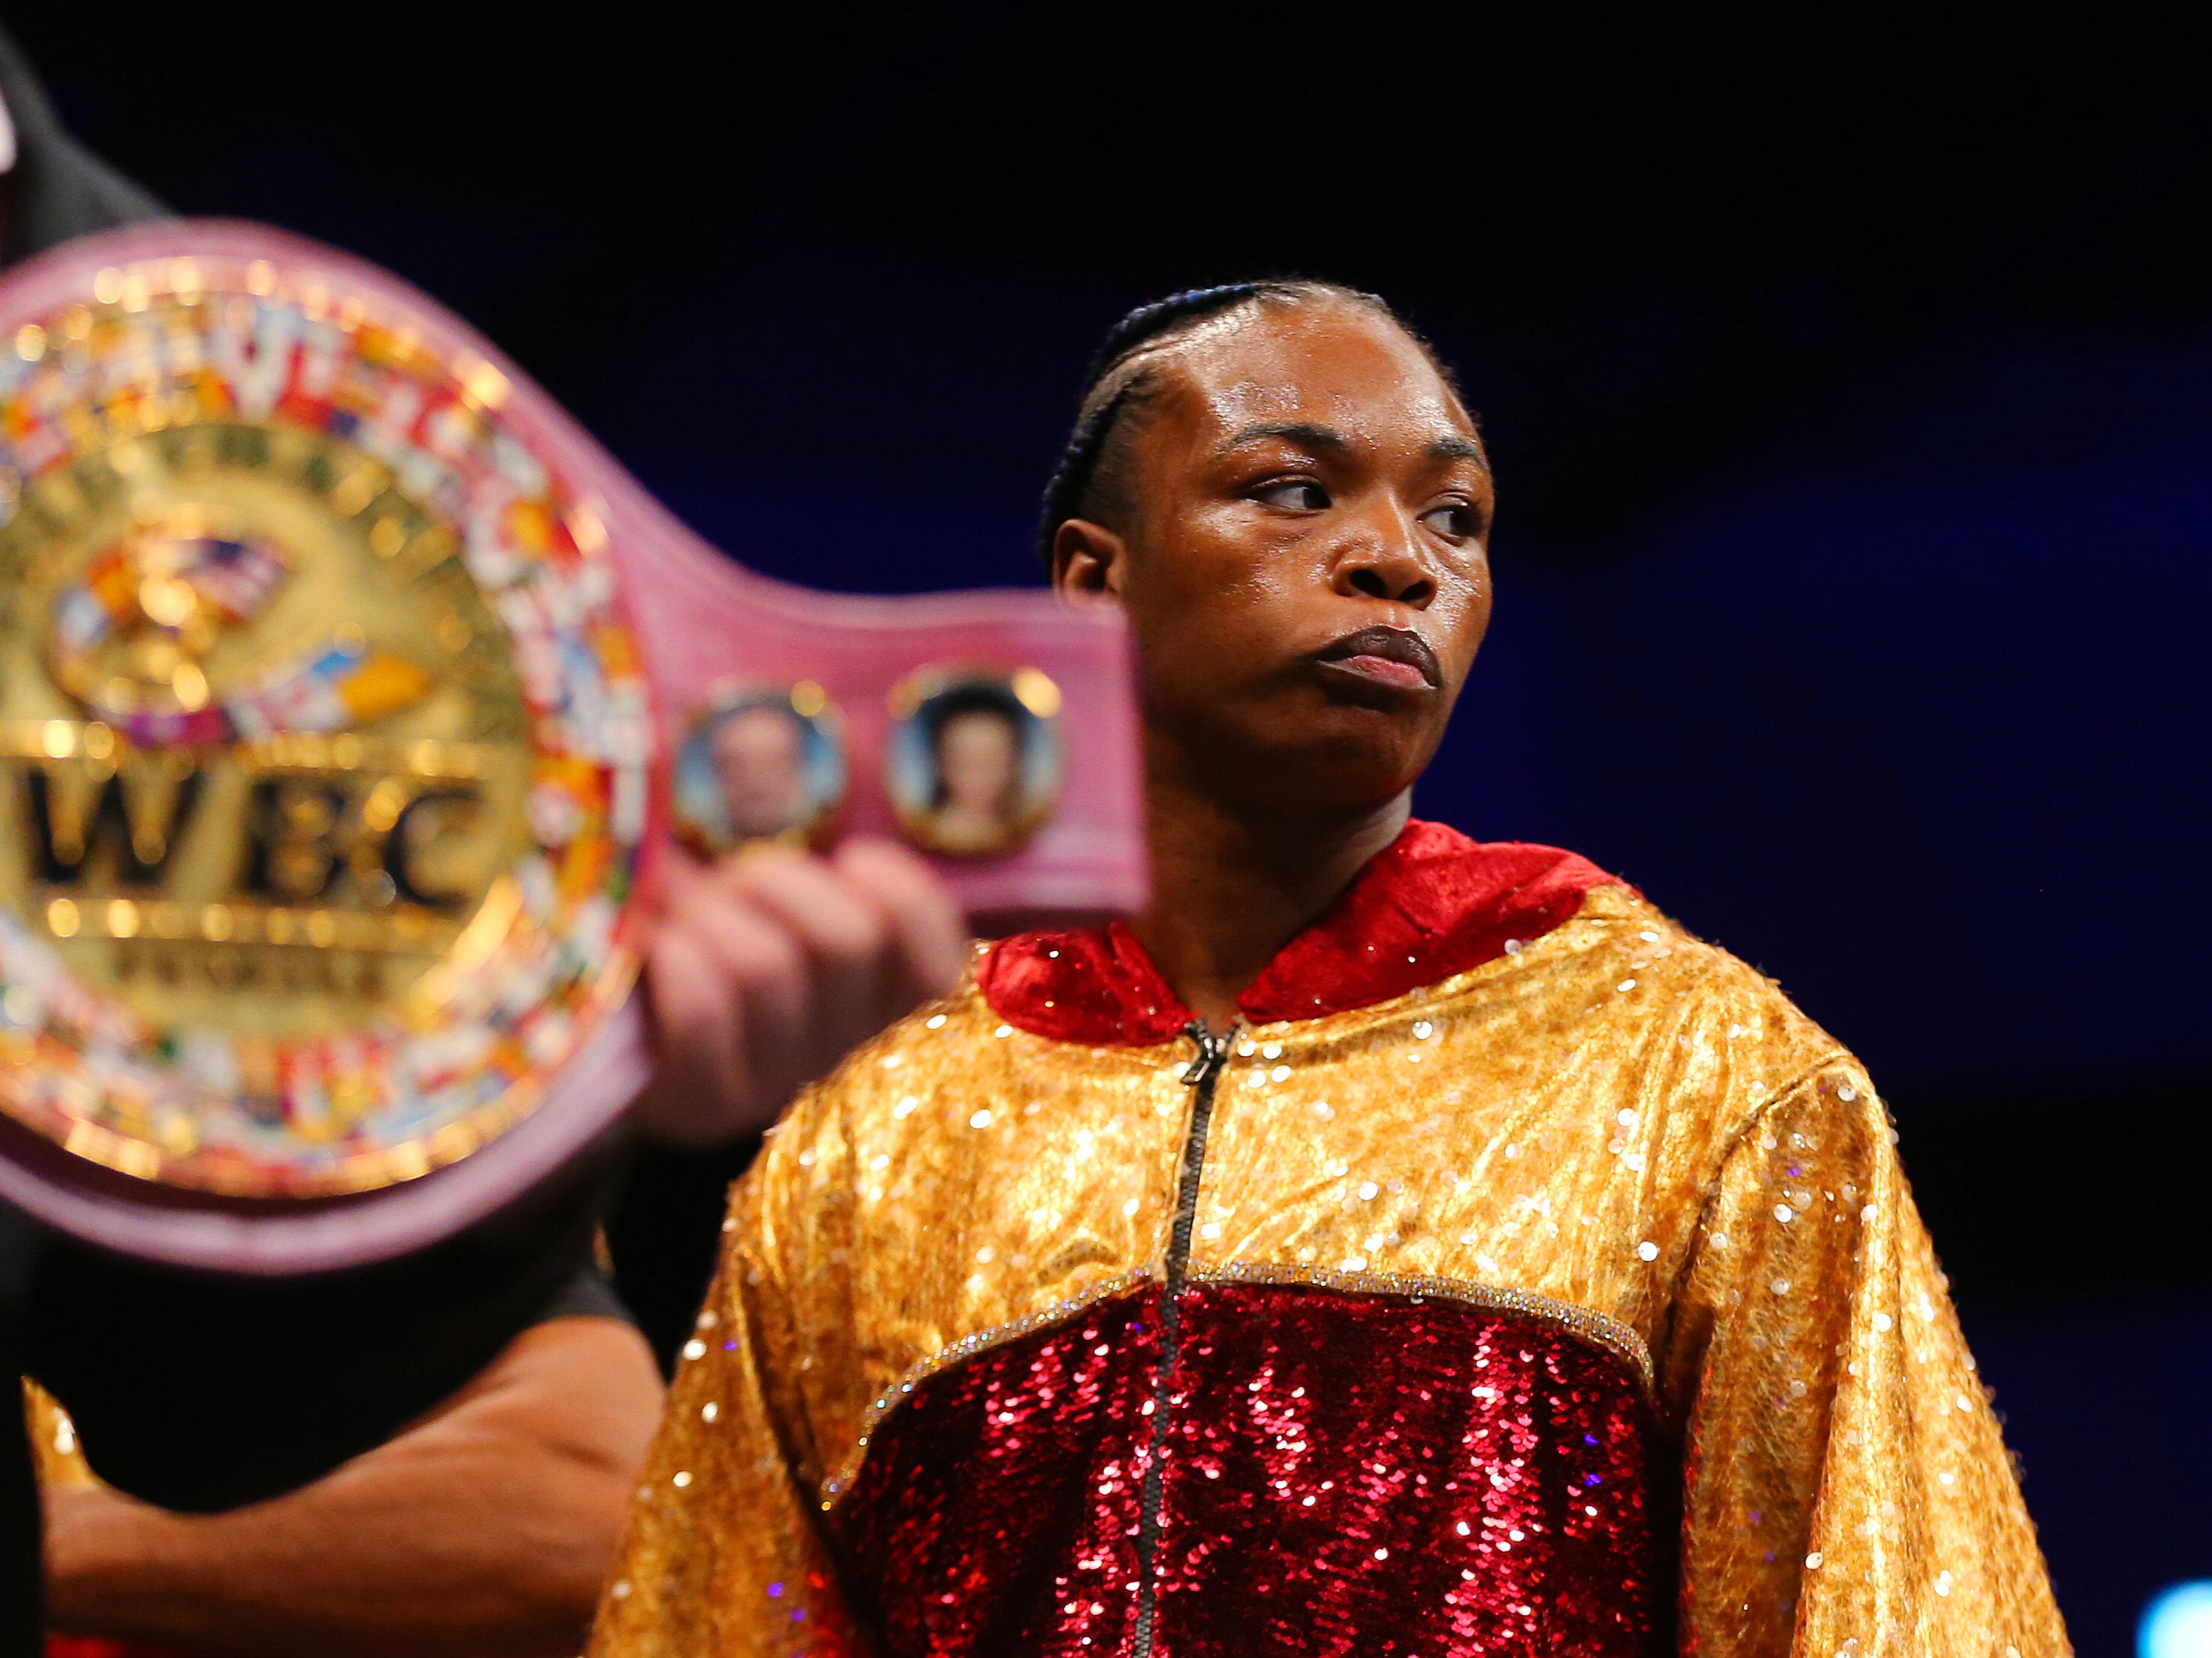 Claressa Shields is expected to fight Savannah Marshall this year